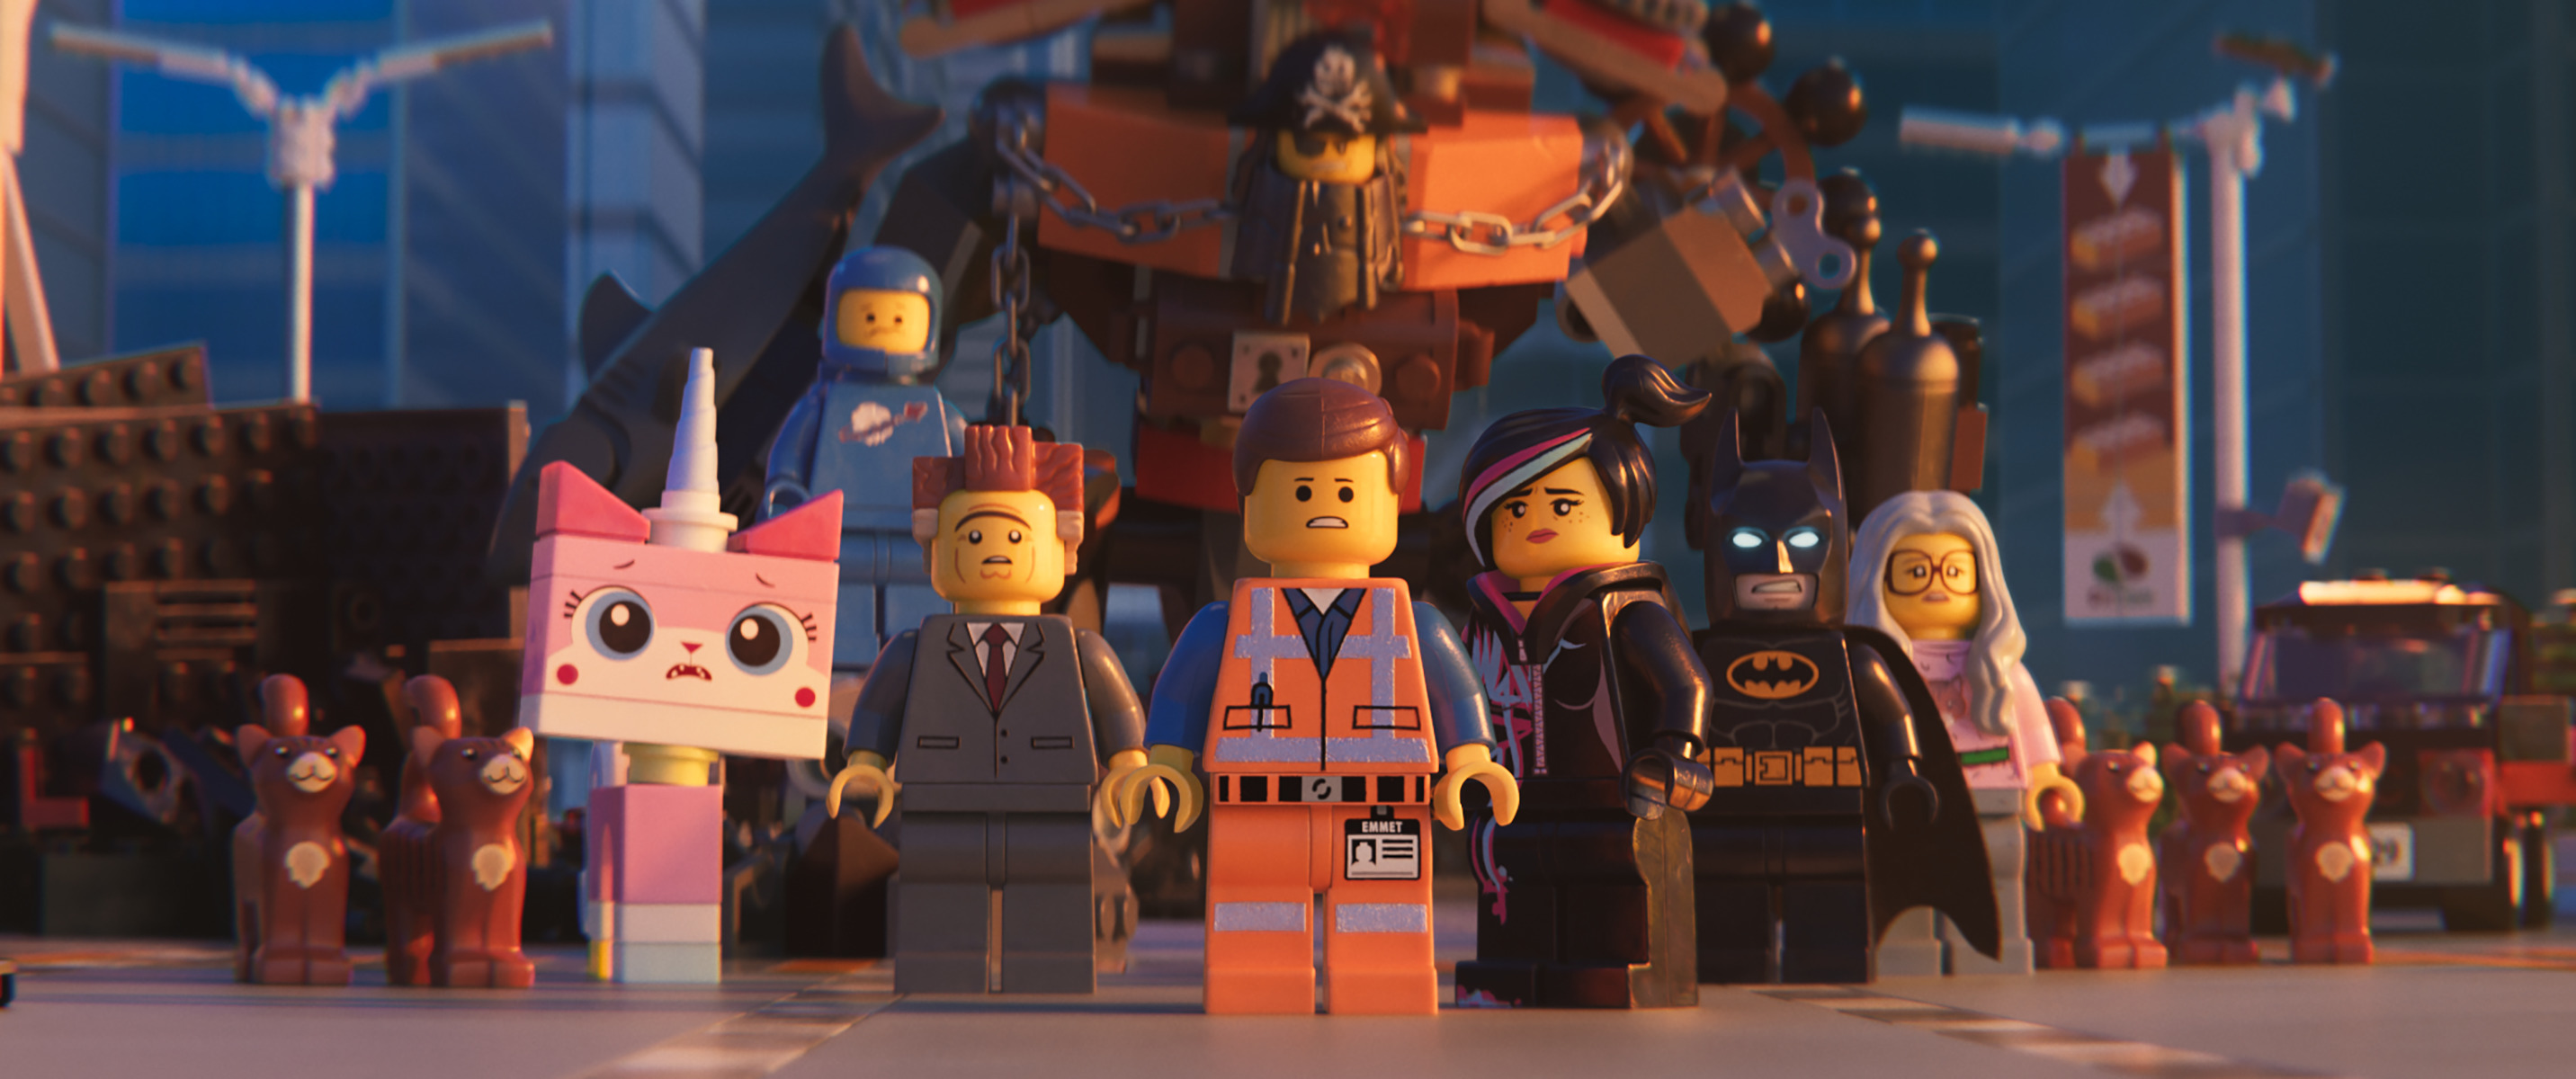 The Lego Movie 2: The Second Part - Meet the cast | Gallery | Wonderwall.com